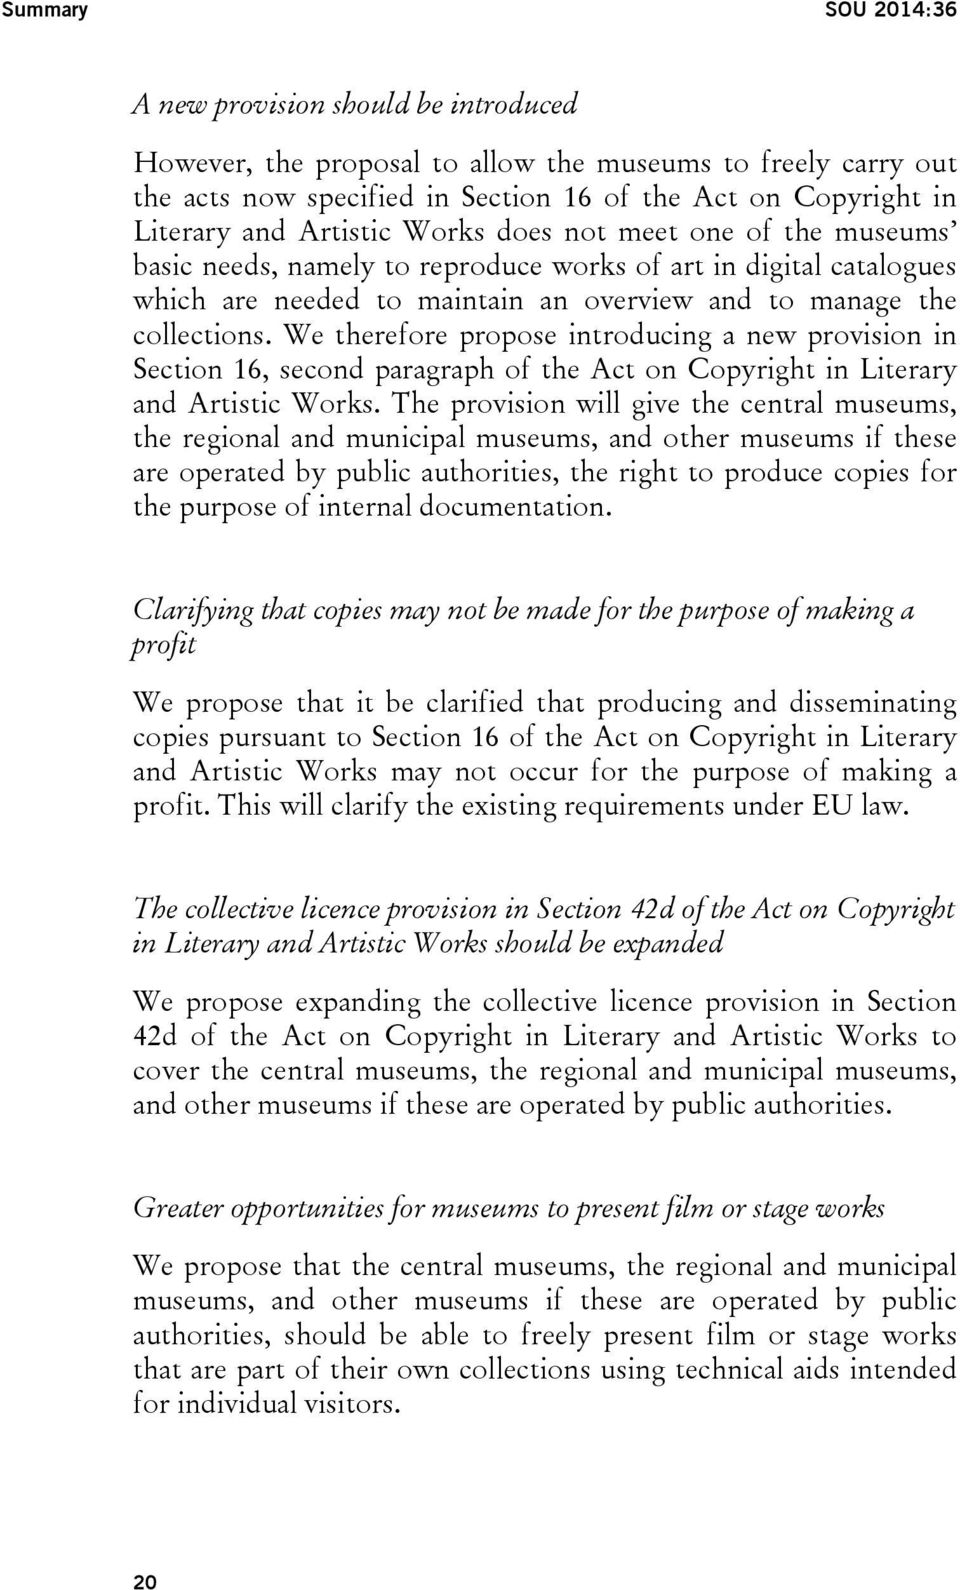 We therefore propose introducing a new provision in Section 16, second paragraph of the Act on Copyright in Literary and Artistic Works.